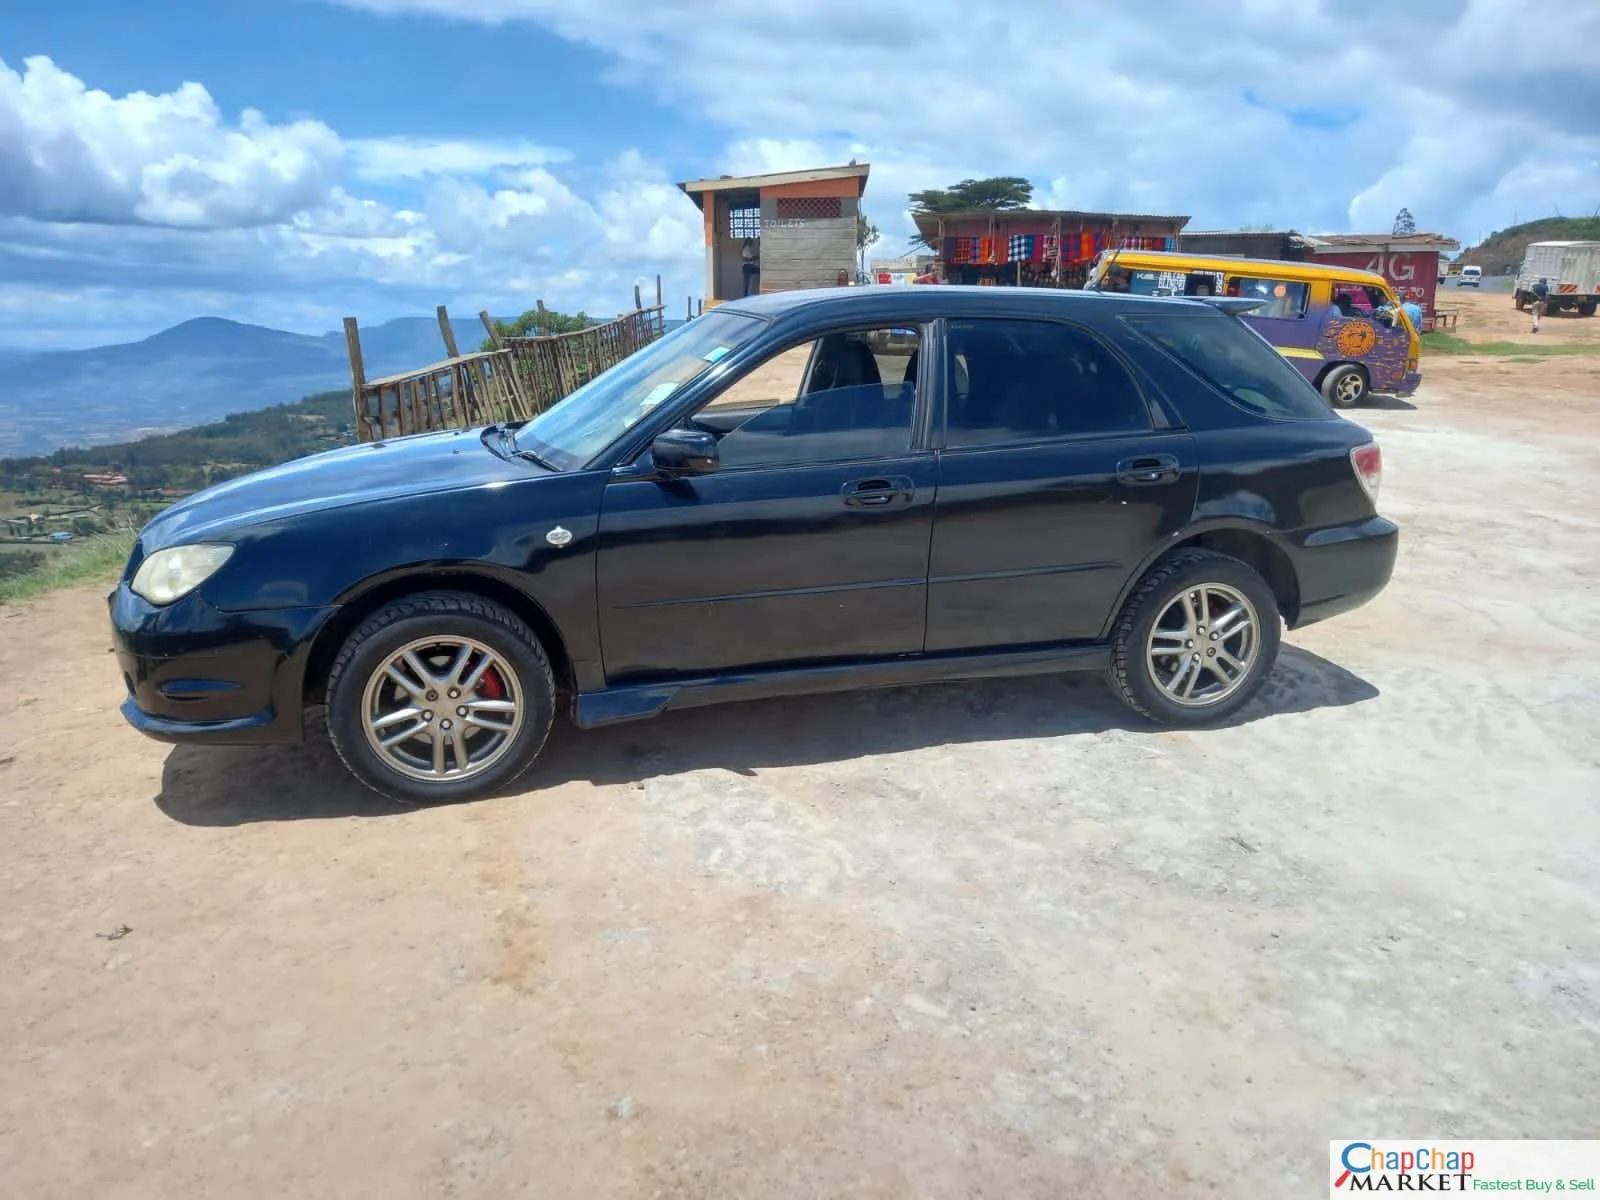 Cars For Sale-Subaru Impreza kenya QUICK SALE You Pay 30% deposit Trade in Ok Impreza for sale in kenya hire purchase installments EXCLUSIVE 9